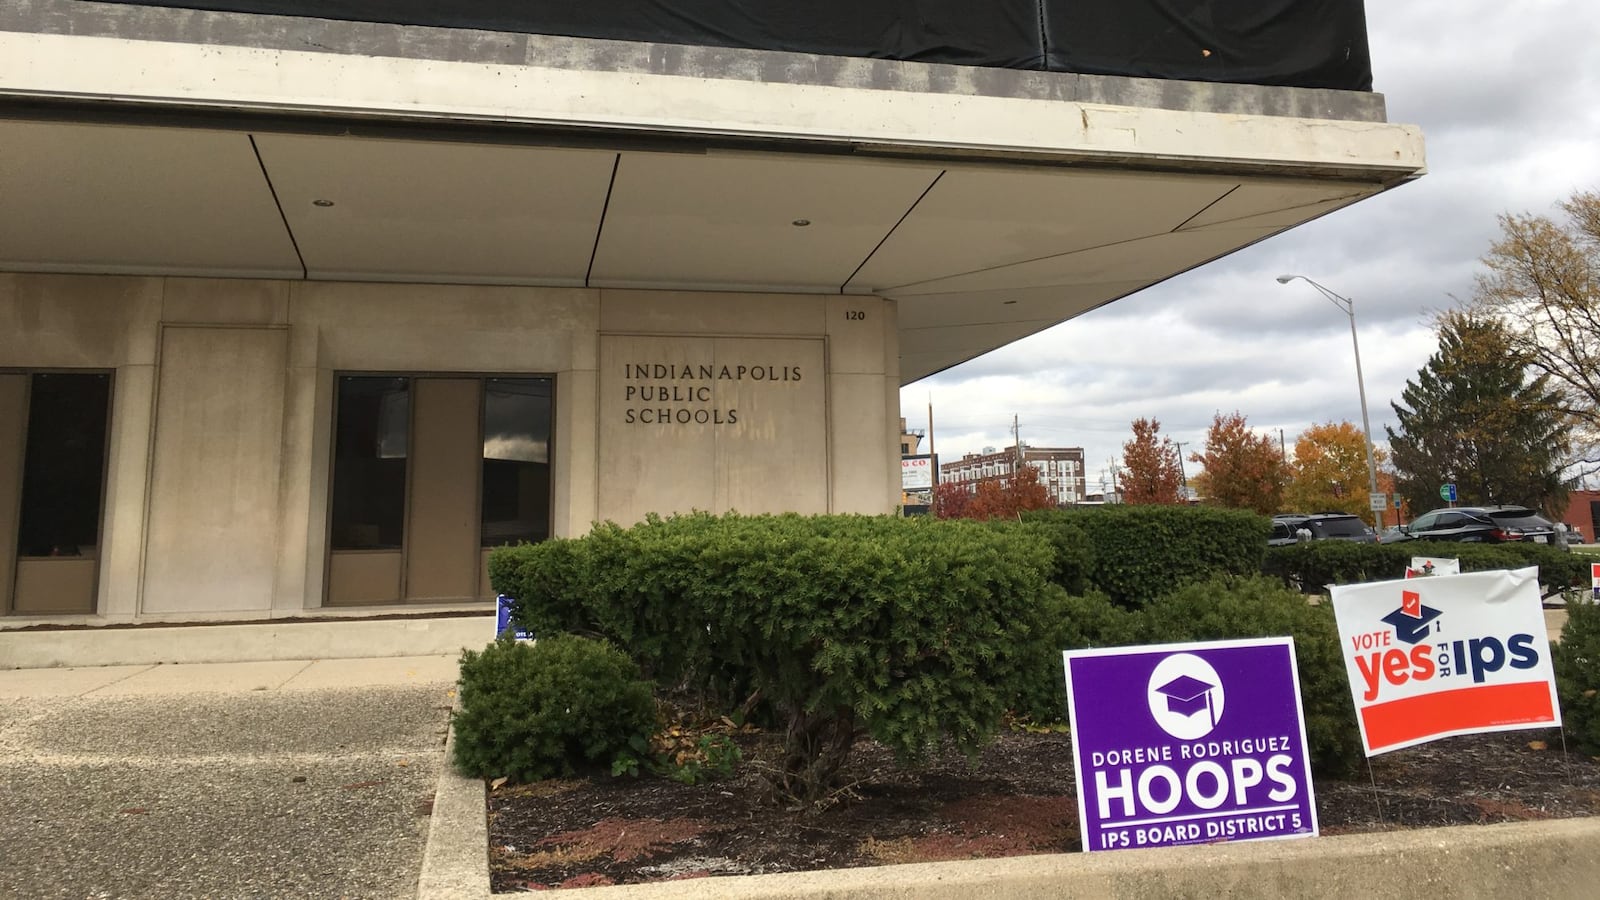 Indianapolis Public Schools is asking for voters to approve two tax measures to raise an additional $272 million.